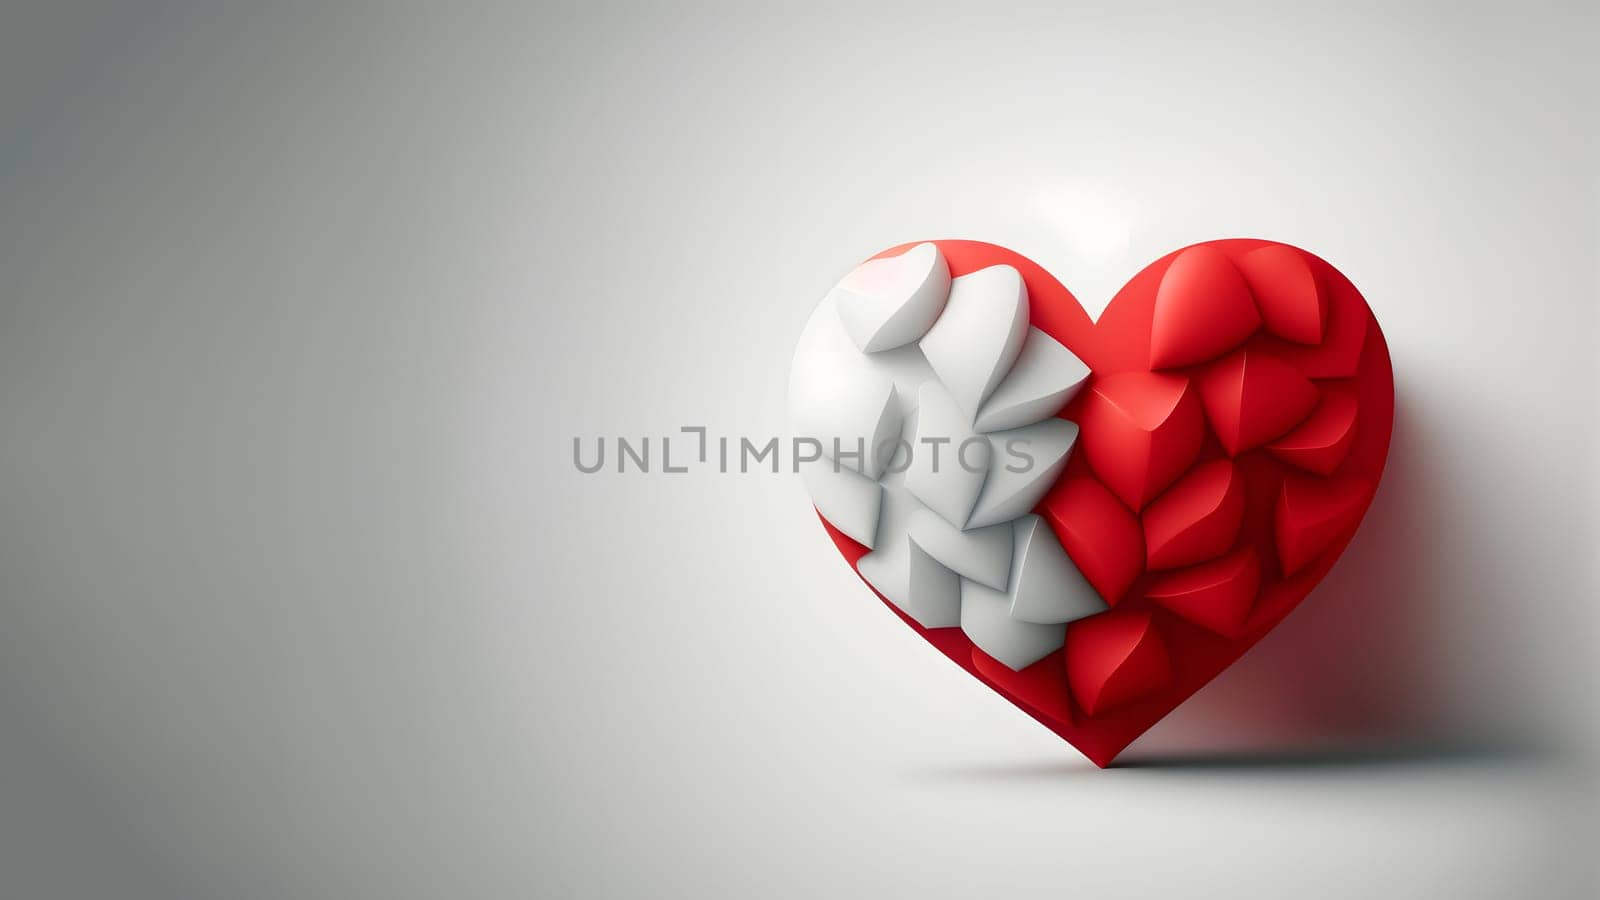 minimalistic valentines day background with heart symbol, neural network generated art. Digitally generated image. Not based on any actual person, scene or pattern.